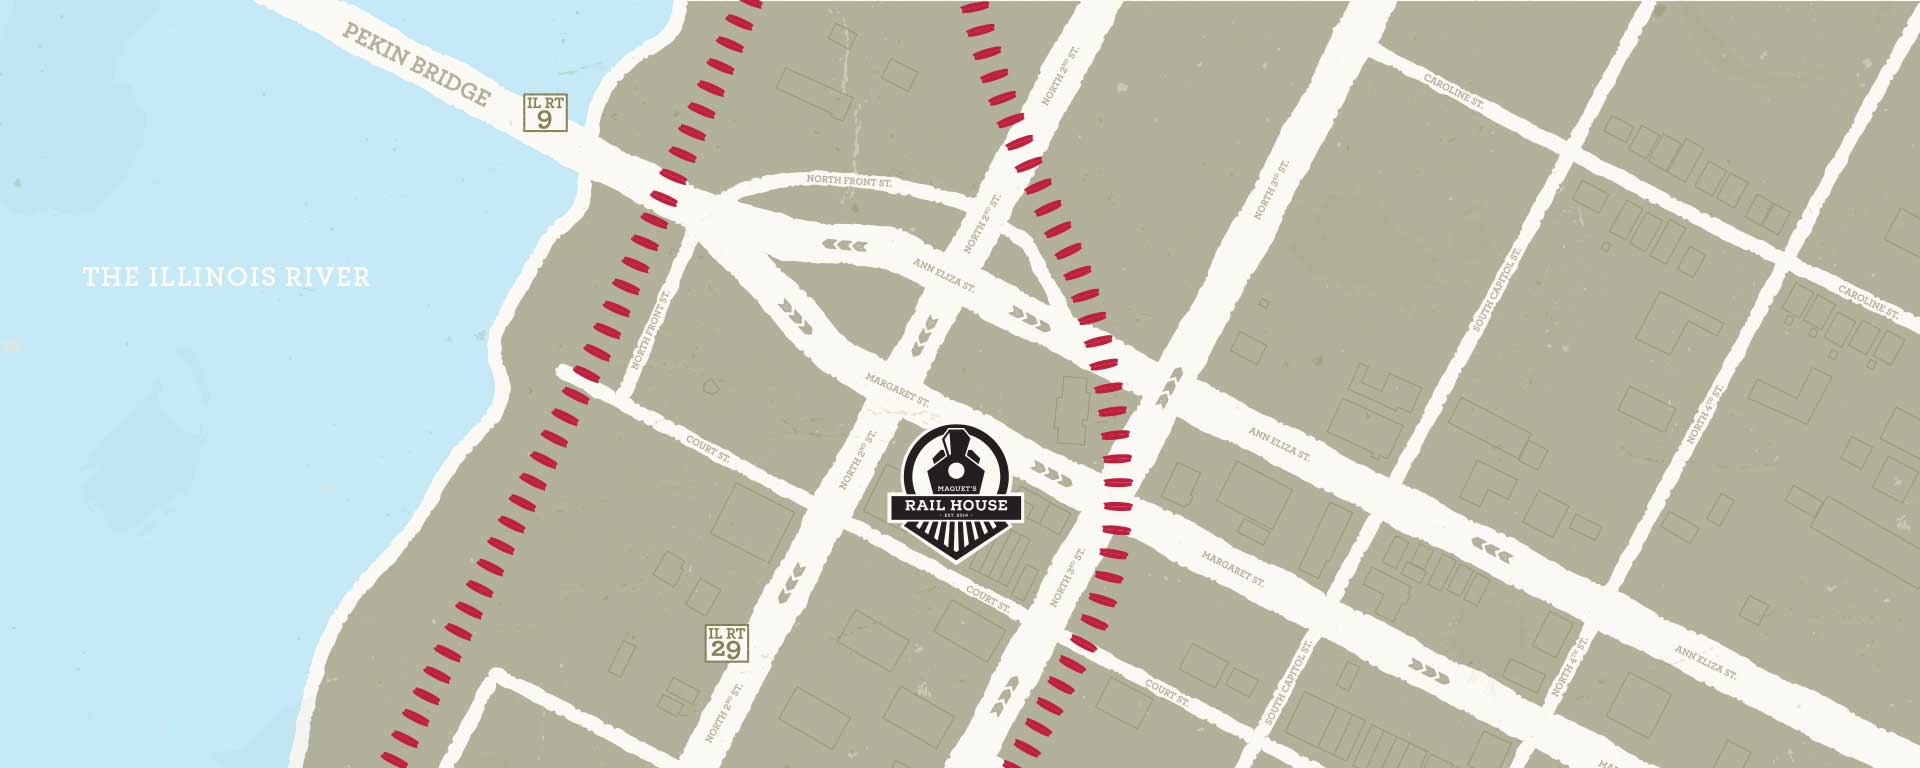 Map of Downtown Pekin showing location of Rail House